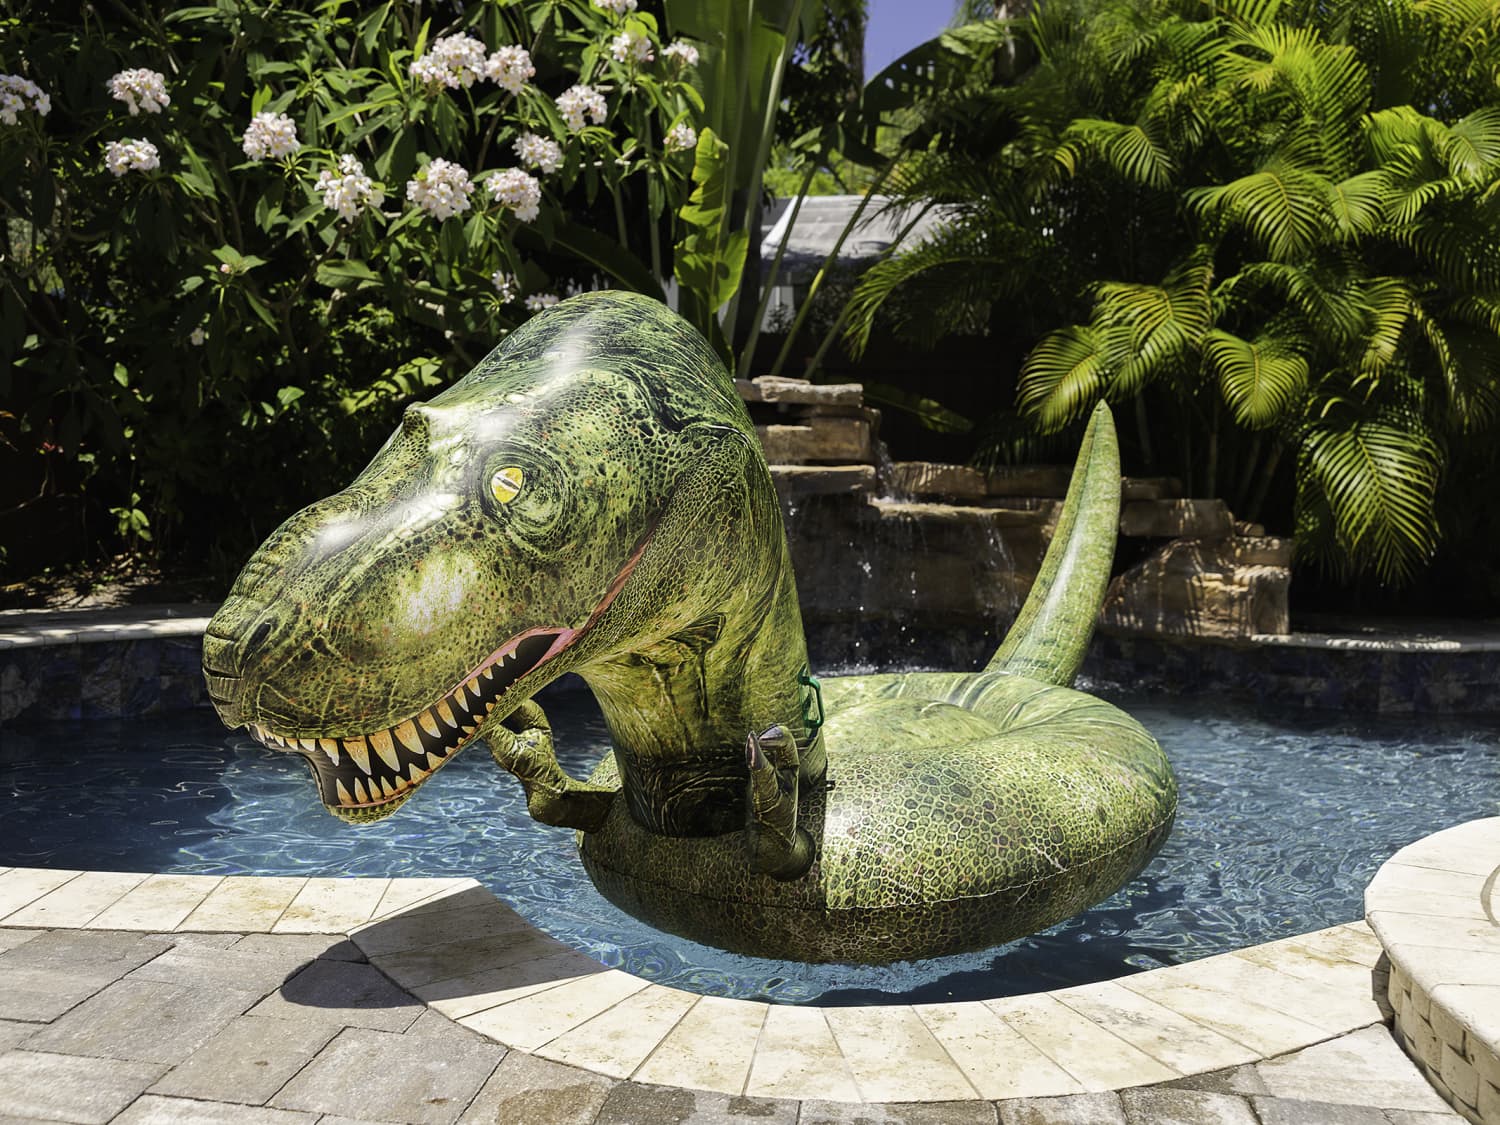 This Brand Is Selling a Giant T-Rex Pool Float